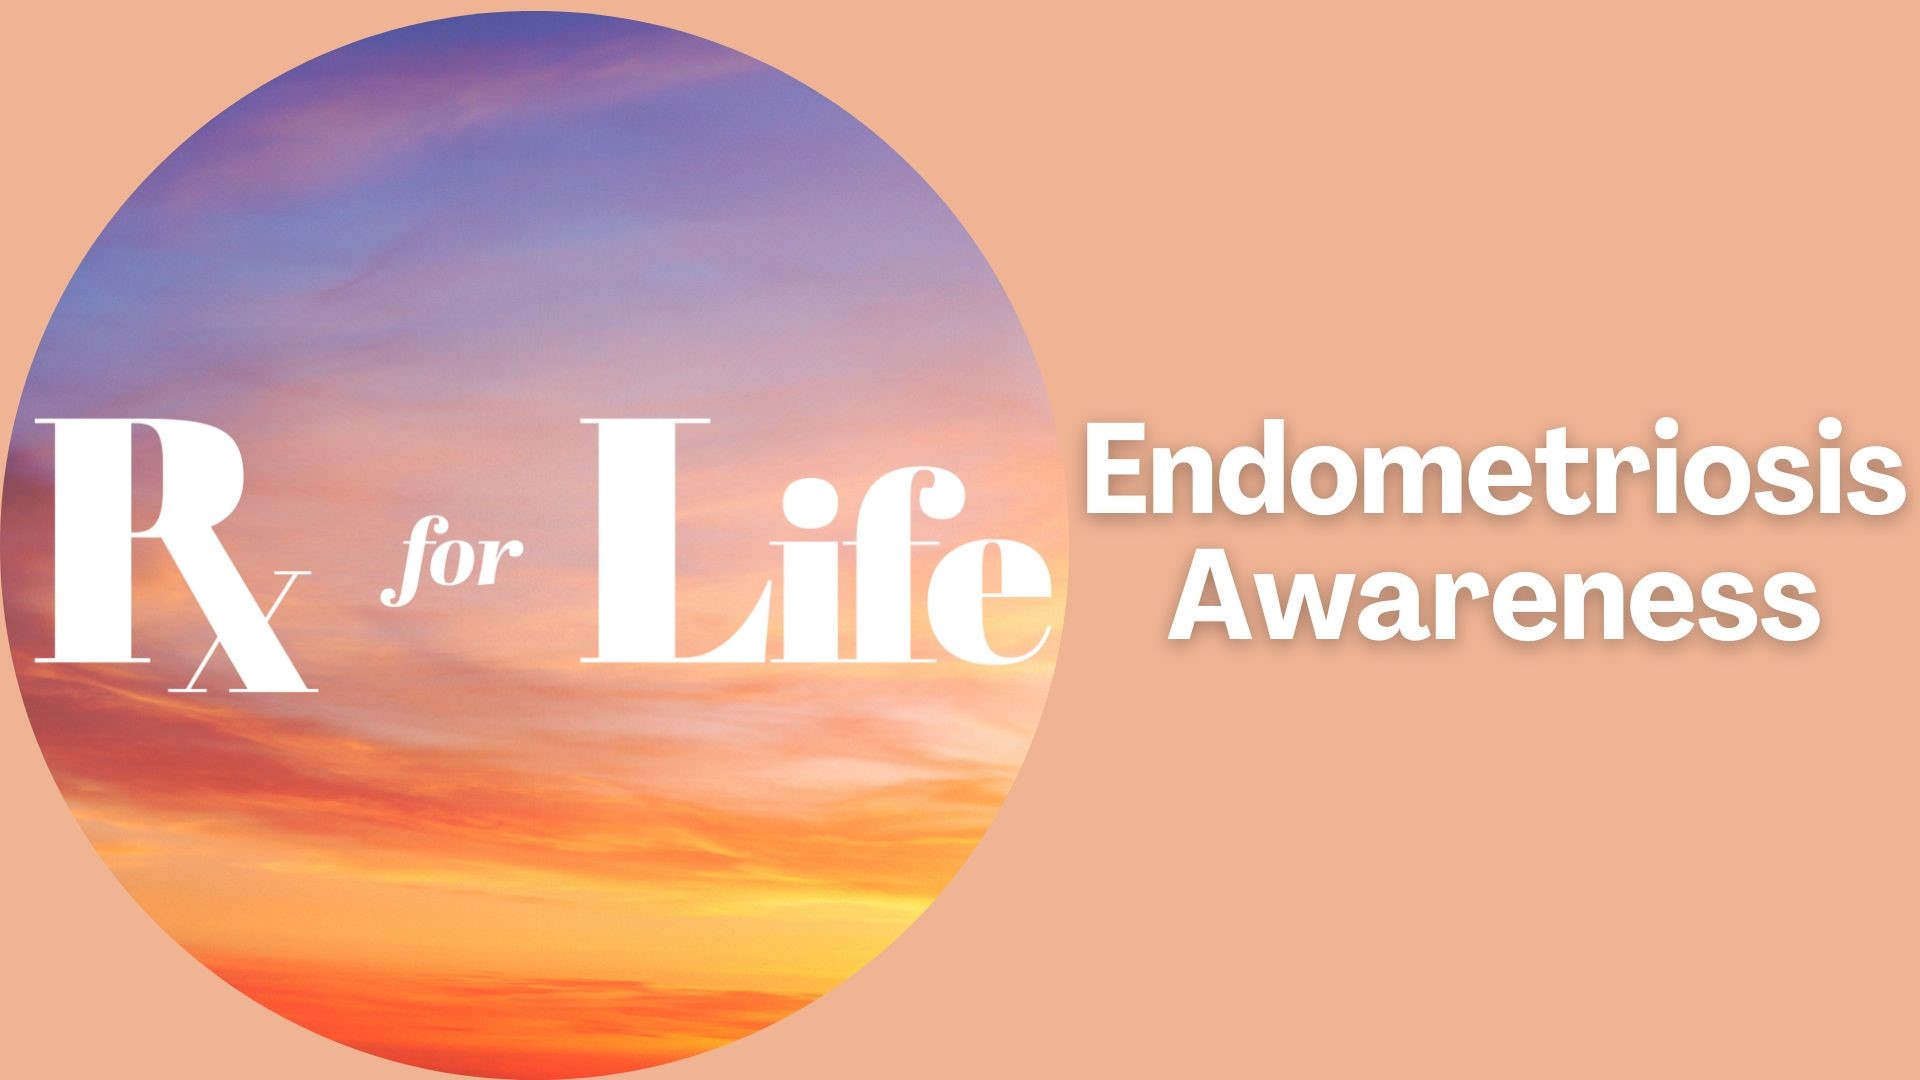 March is endometriosis awareness month. A closer look at this debilitating, painful disease that can be difficult to diagnose.